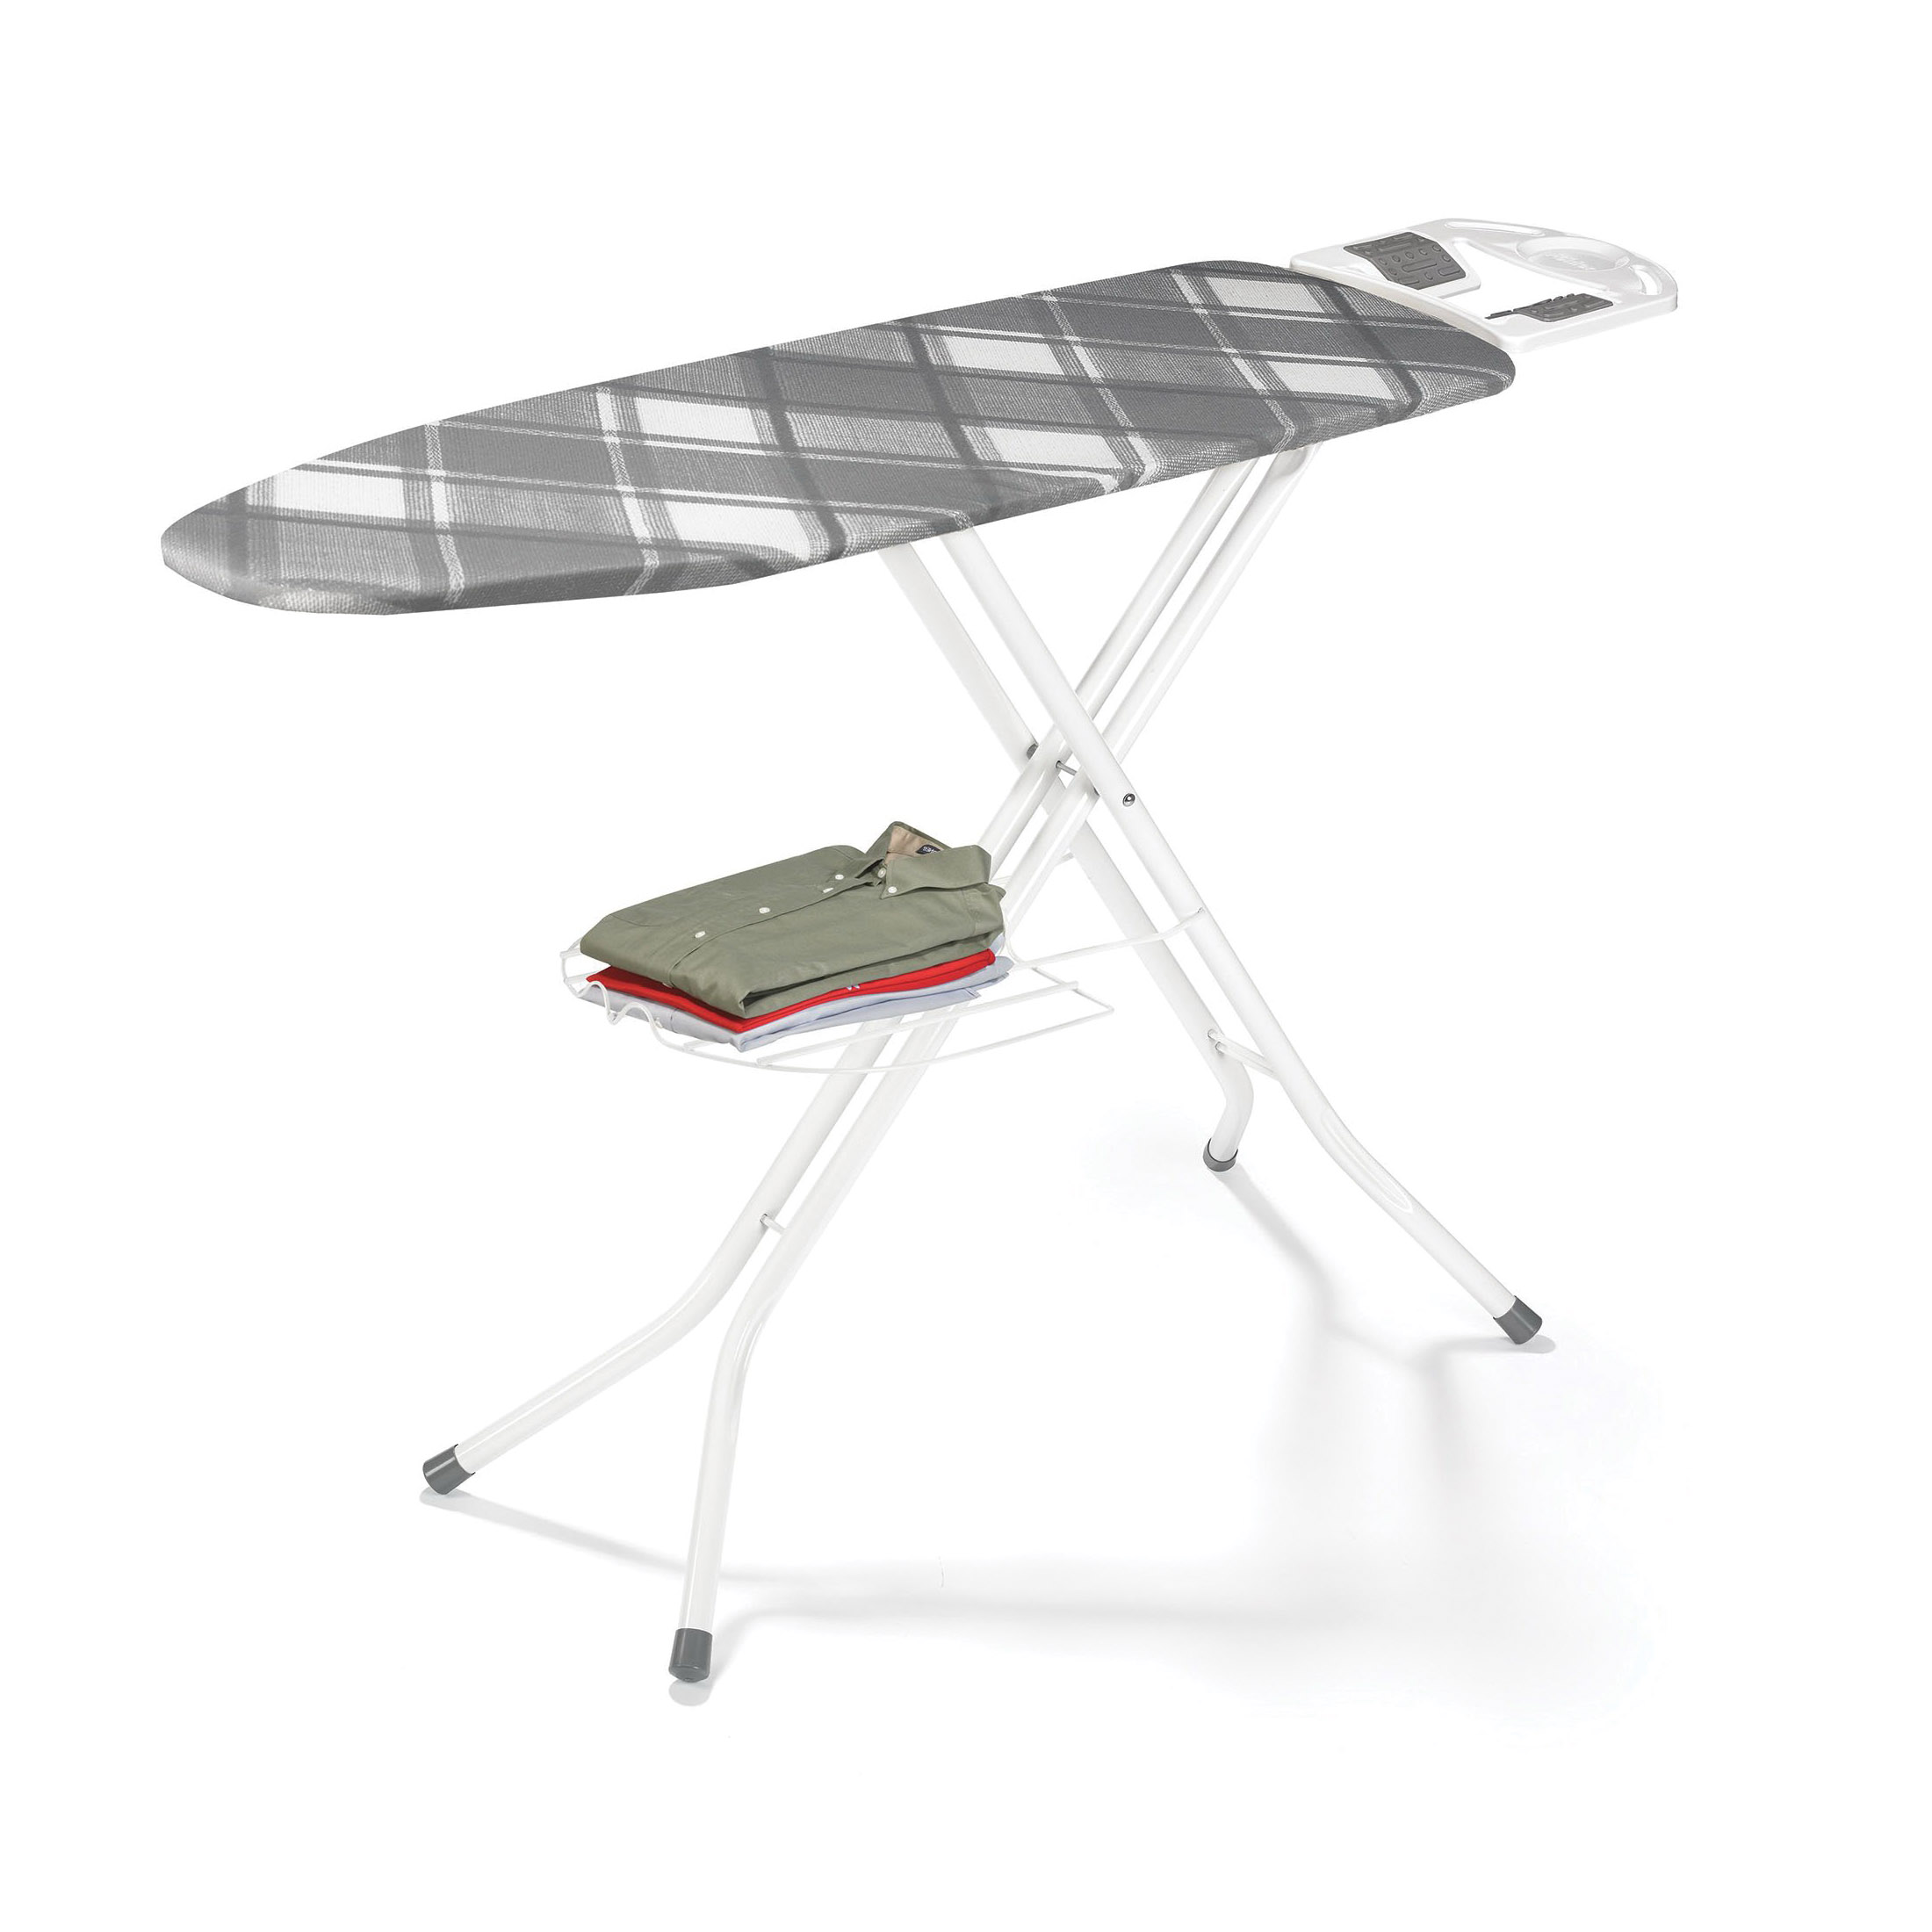 Polder Products IB-1558RM Deluxe Ironing Station, Steel Board - 3